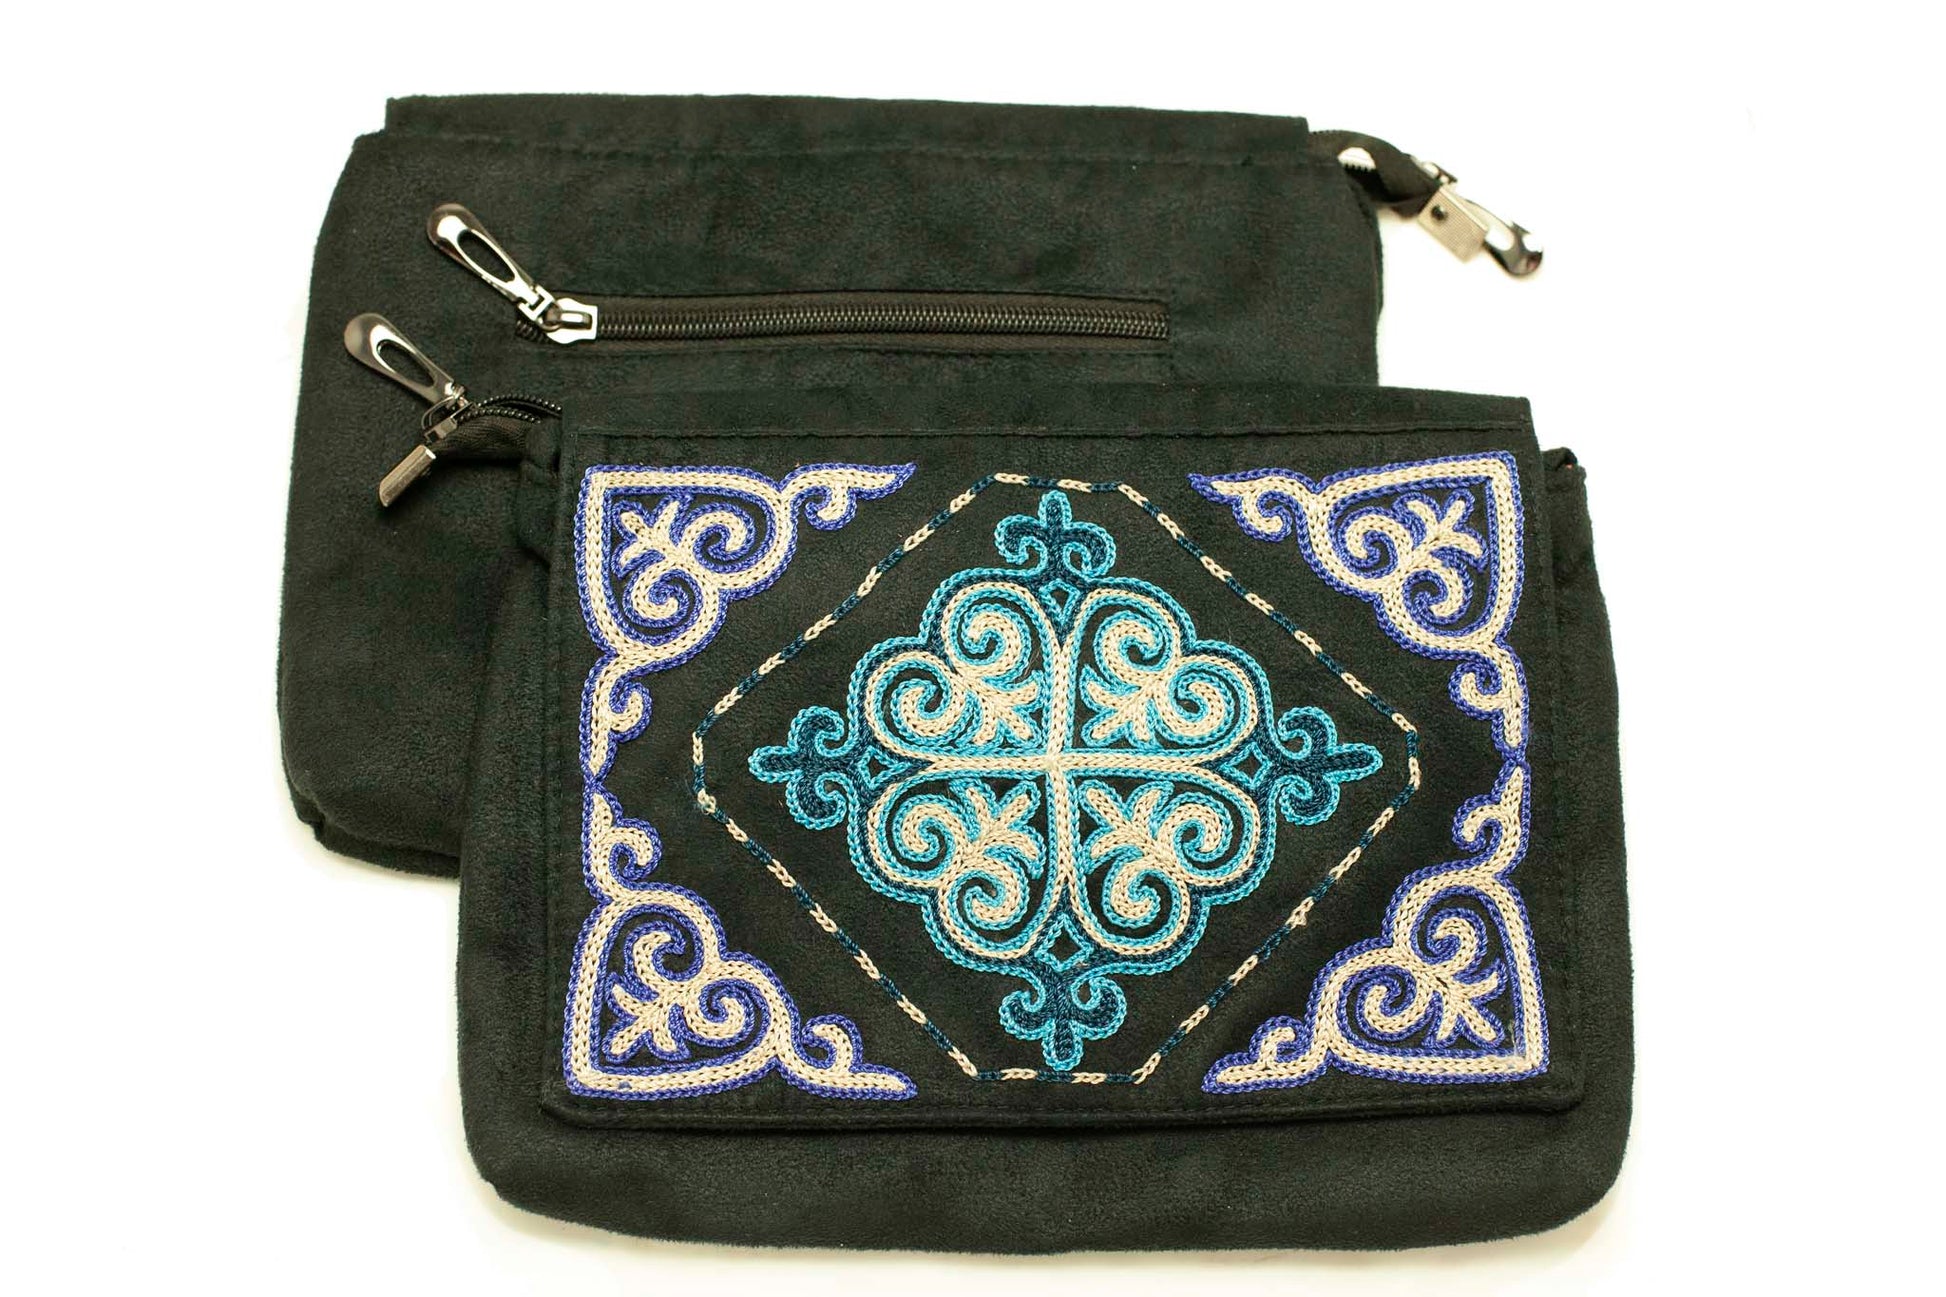 The front flap is embroidered and the rear is kept plain. The zippered rear-pocket is designed for smaller items.